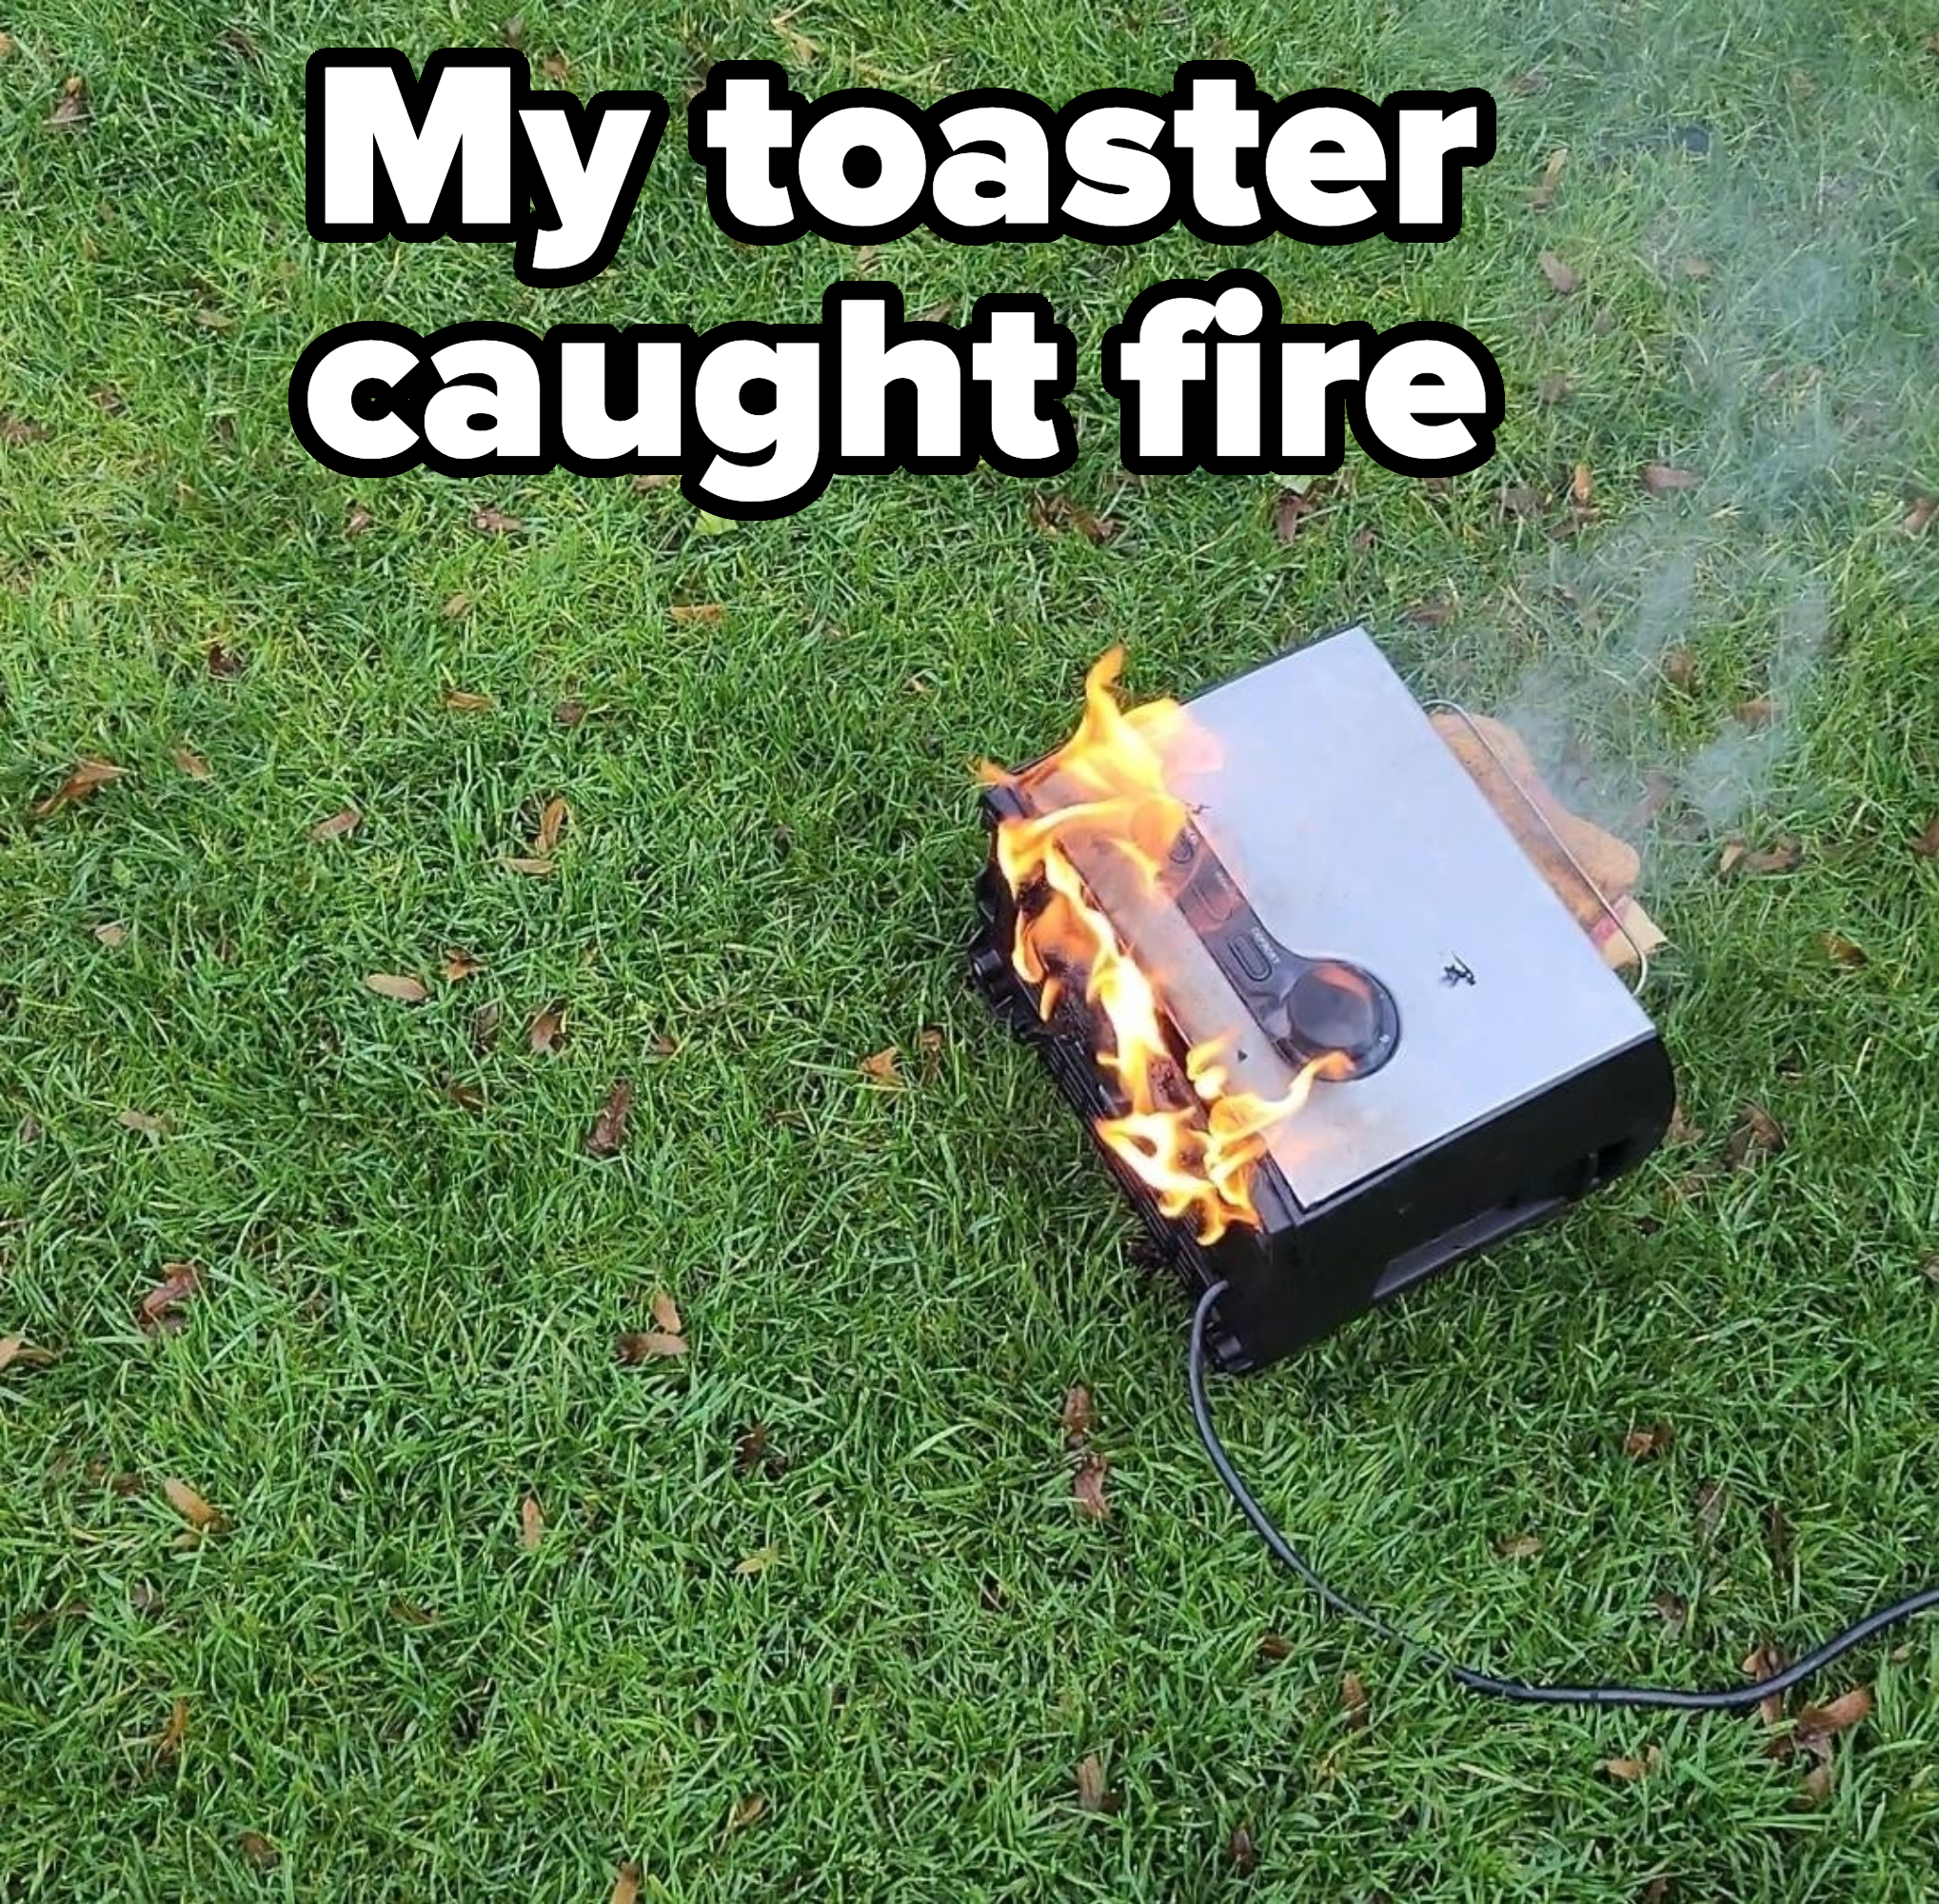 A toaster on fire